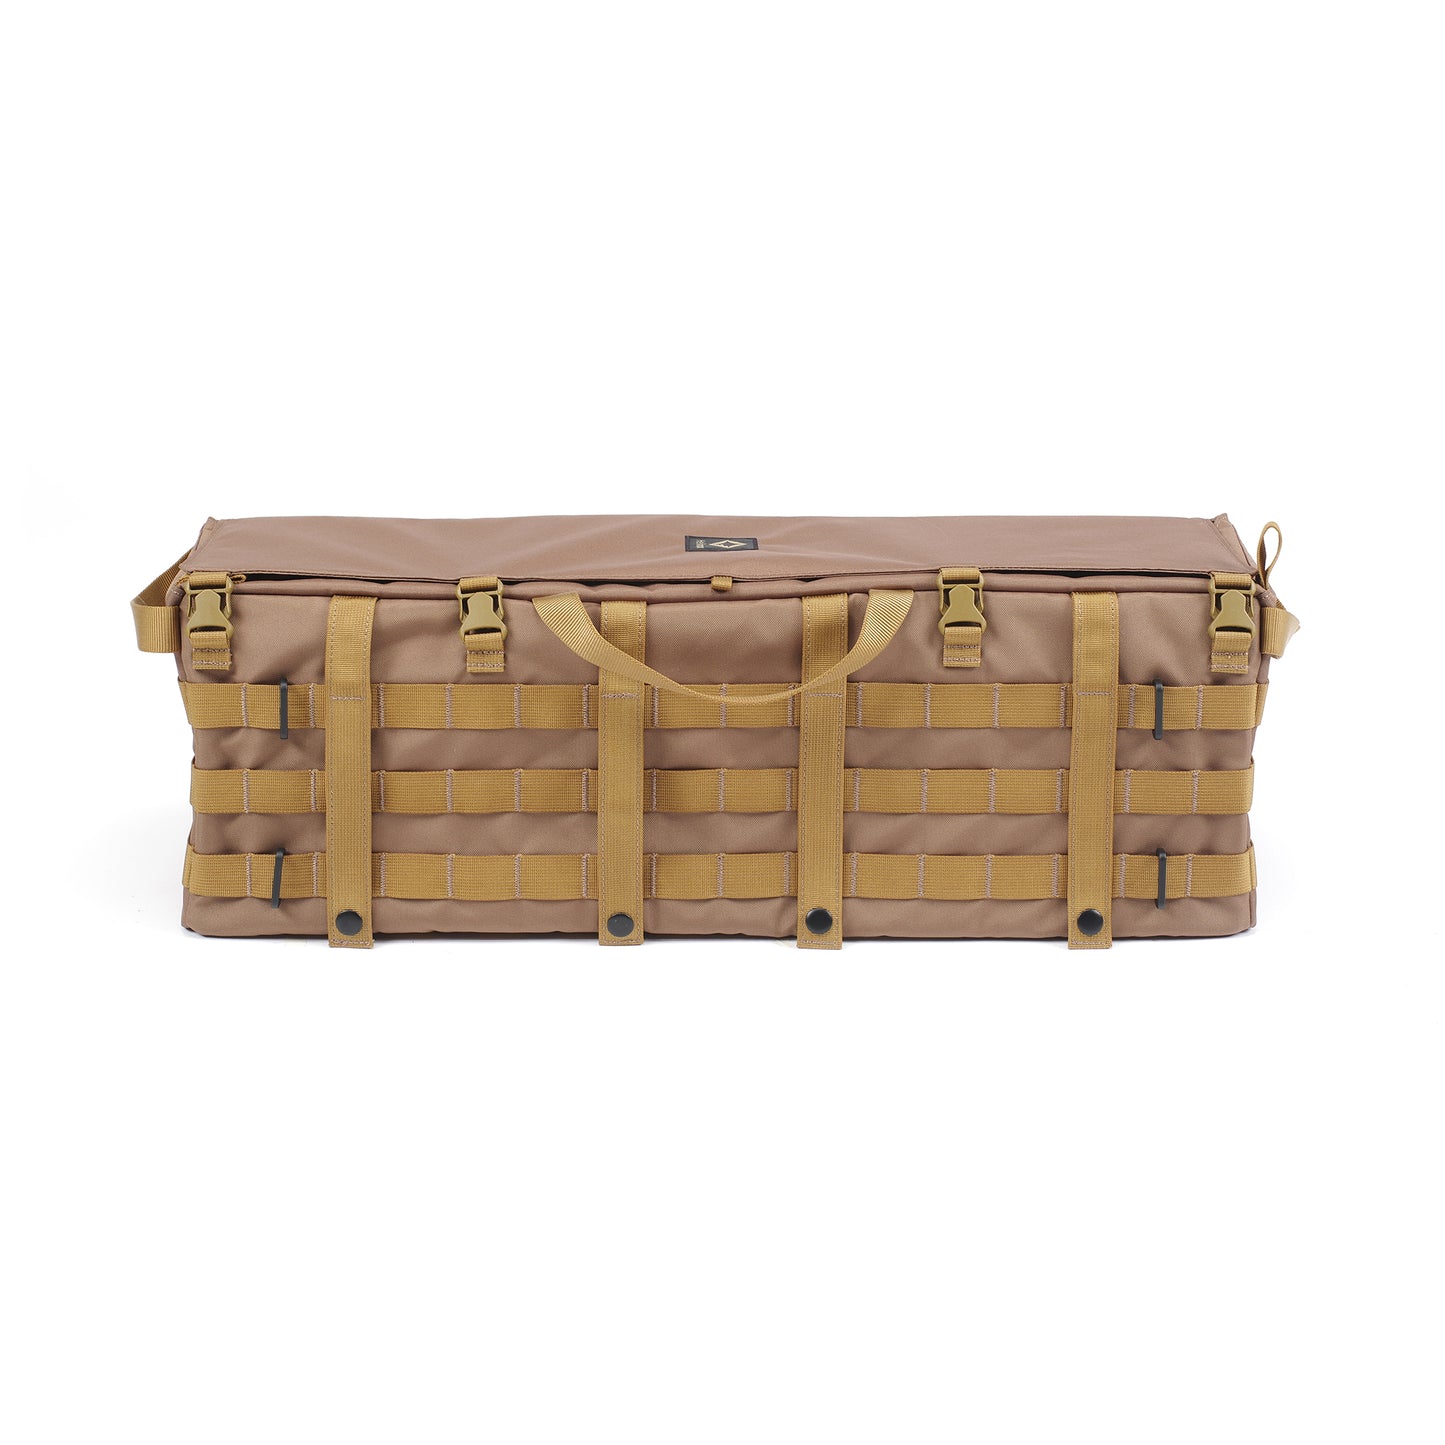 Tac. Table Side Storage L - Coyote Tan